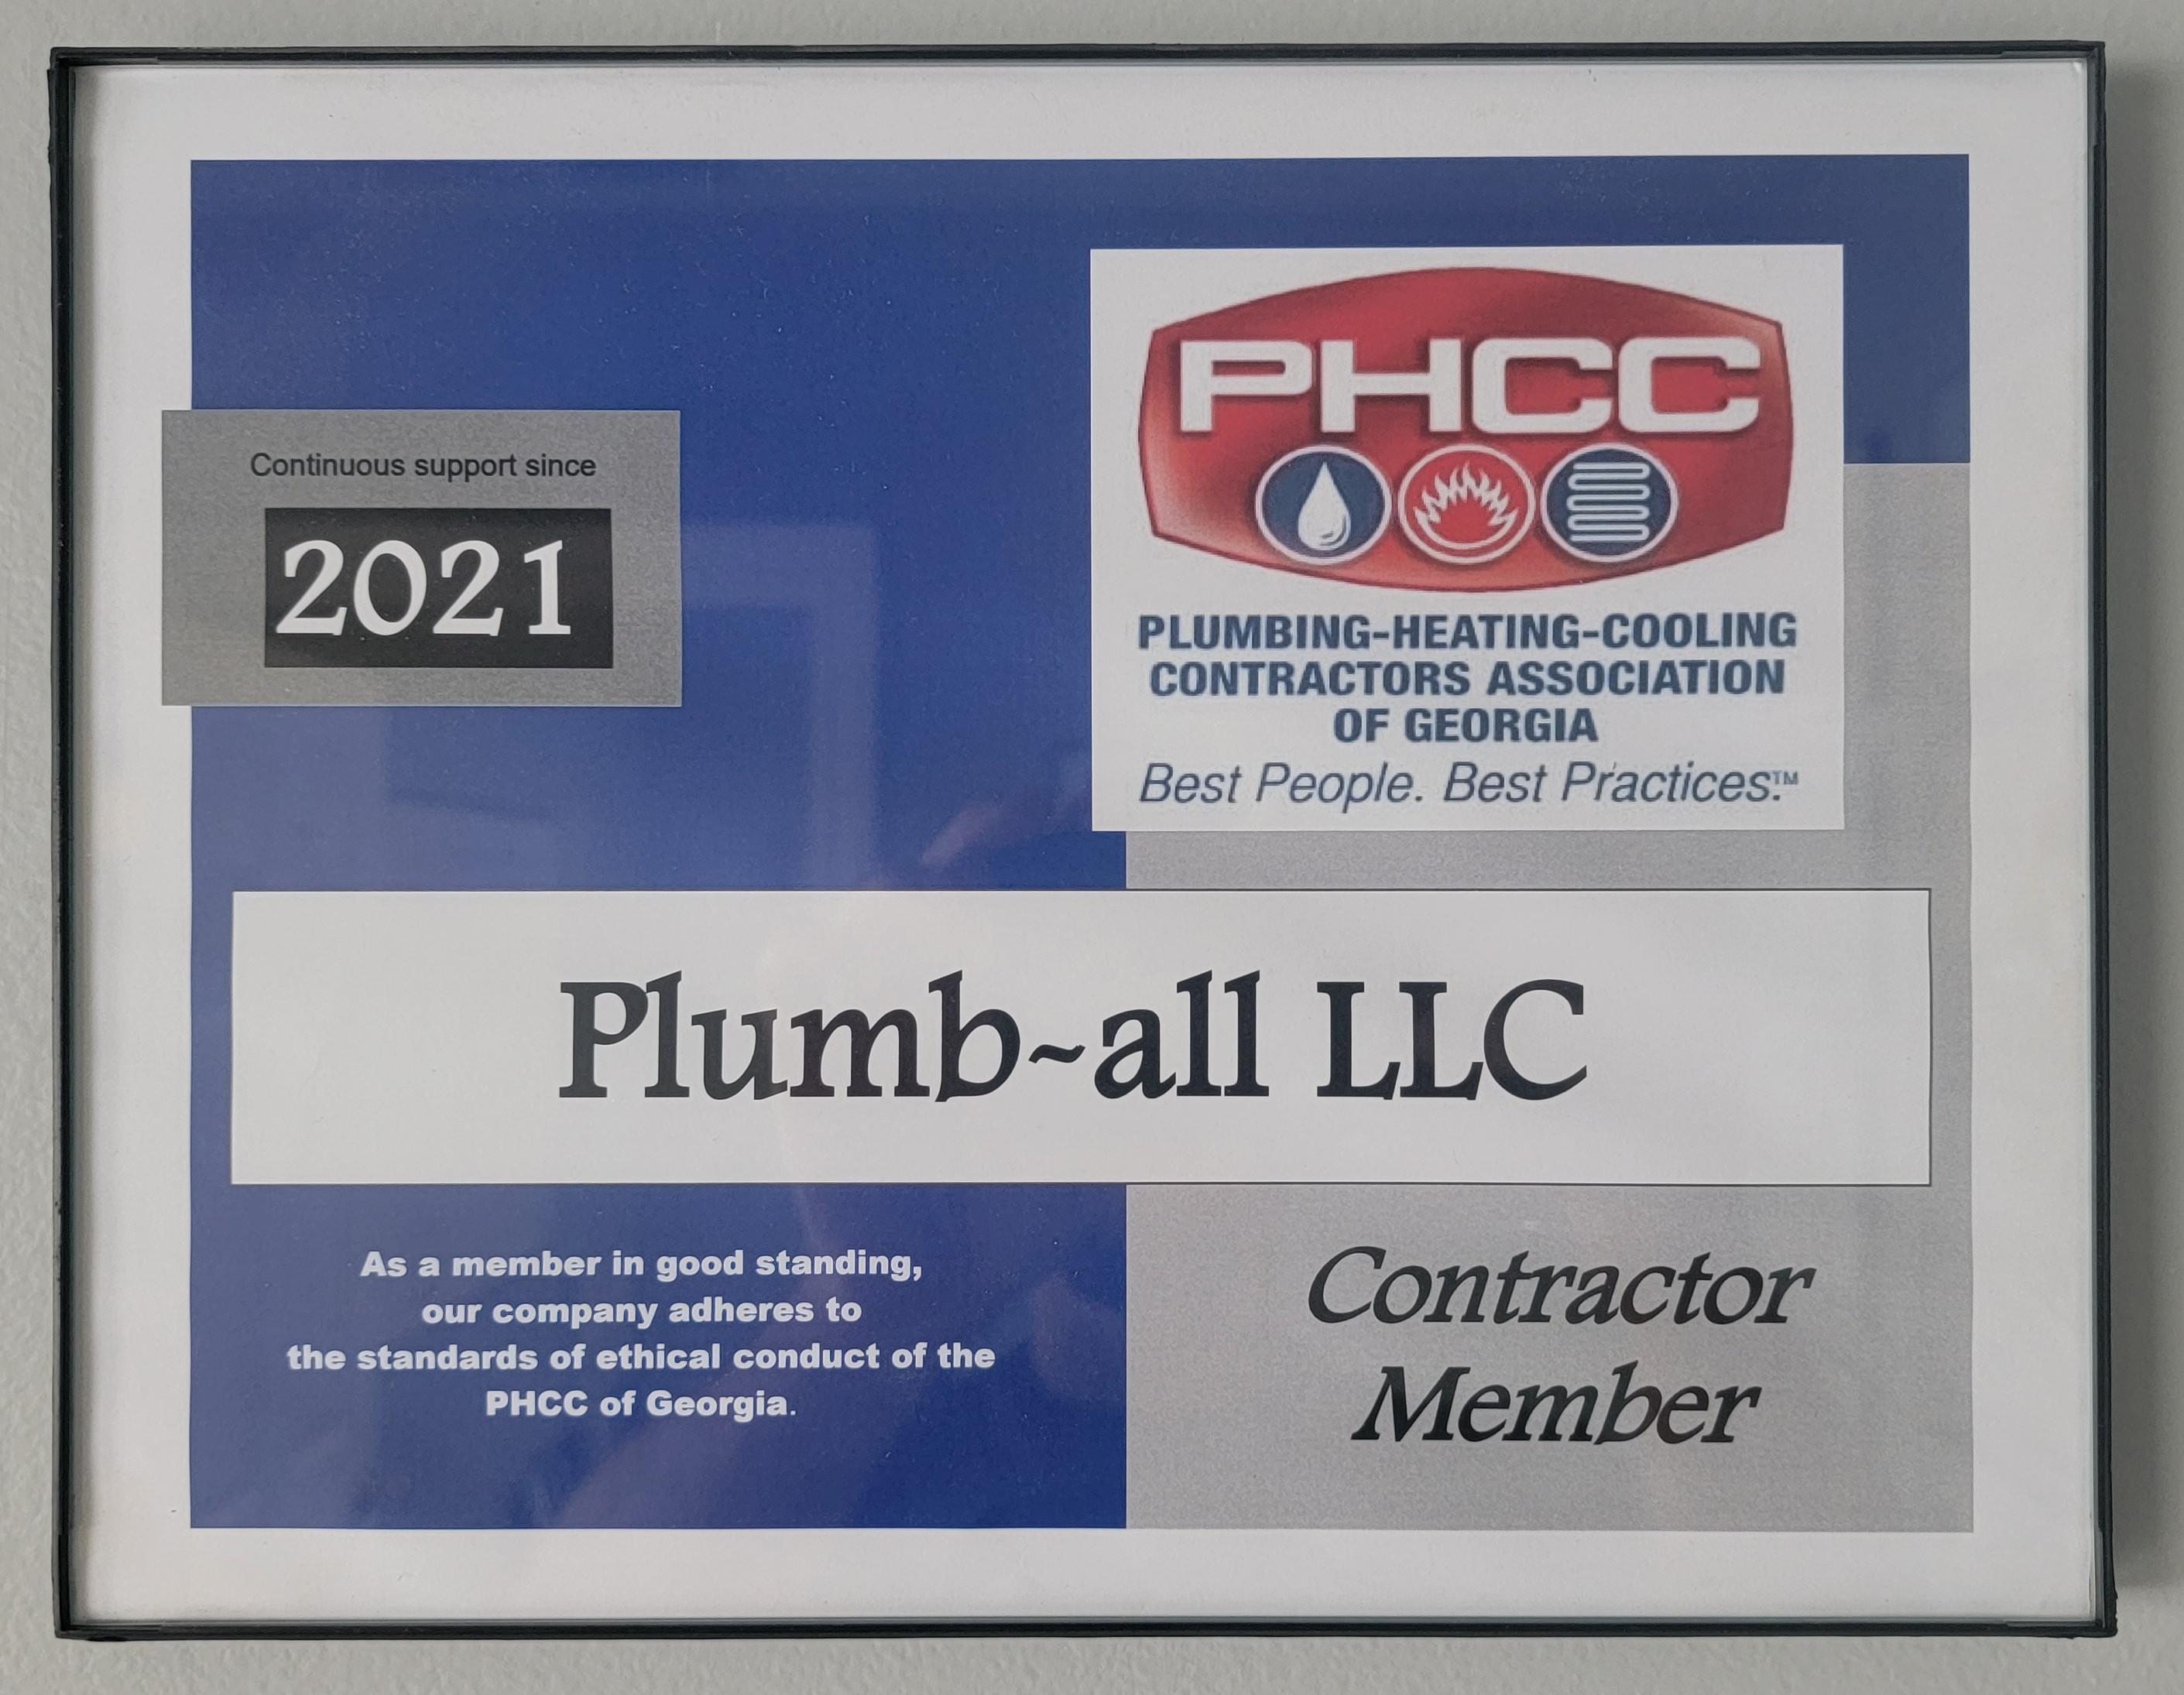 We're proud to announce that we're officially a member of the PHCC and look forward to working with them to better serve our community!